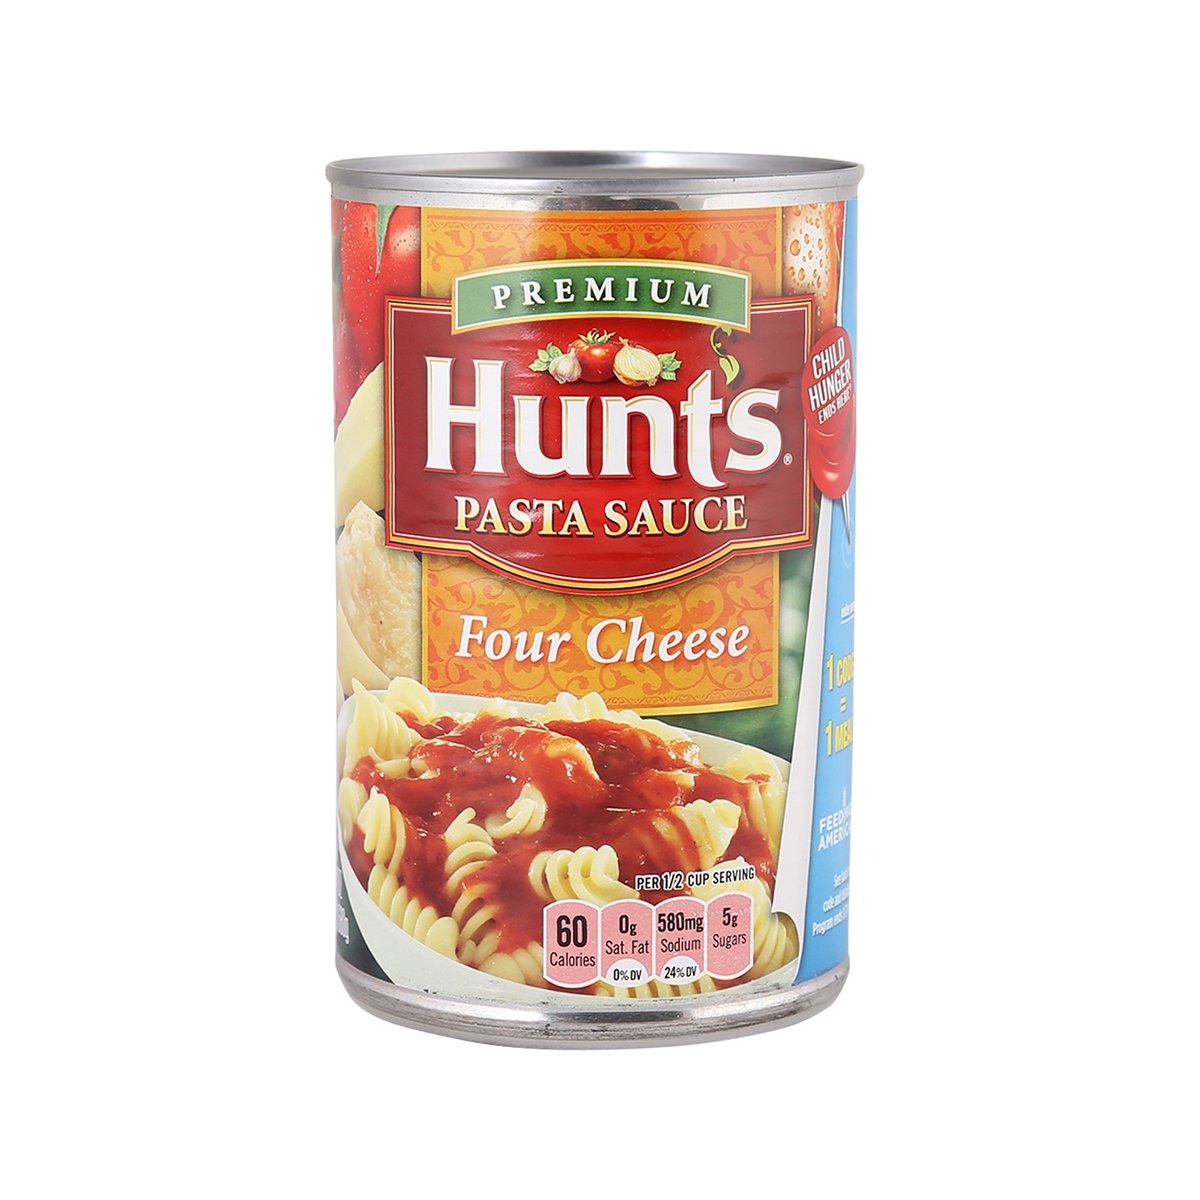 Hunts Pasta Sauce Four Cheese 680g